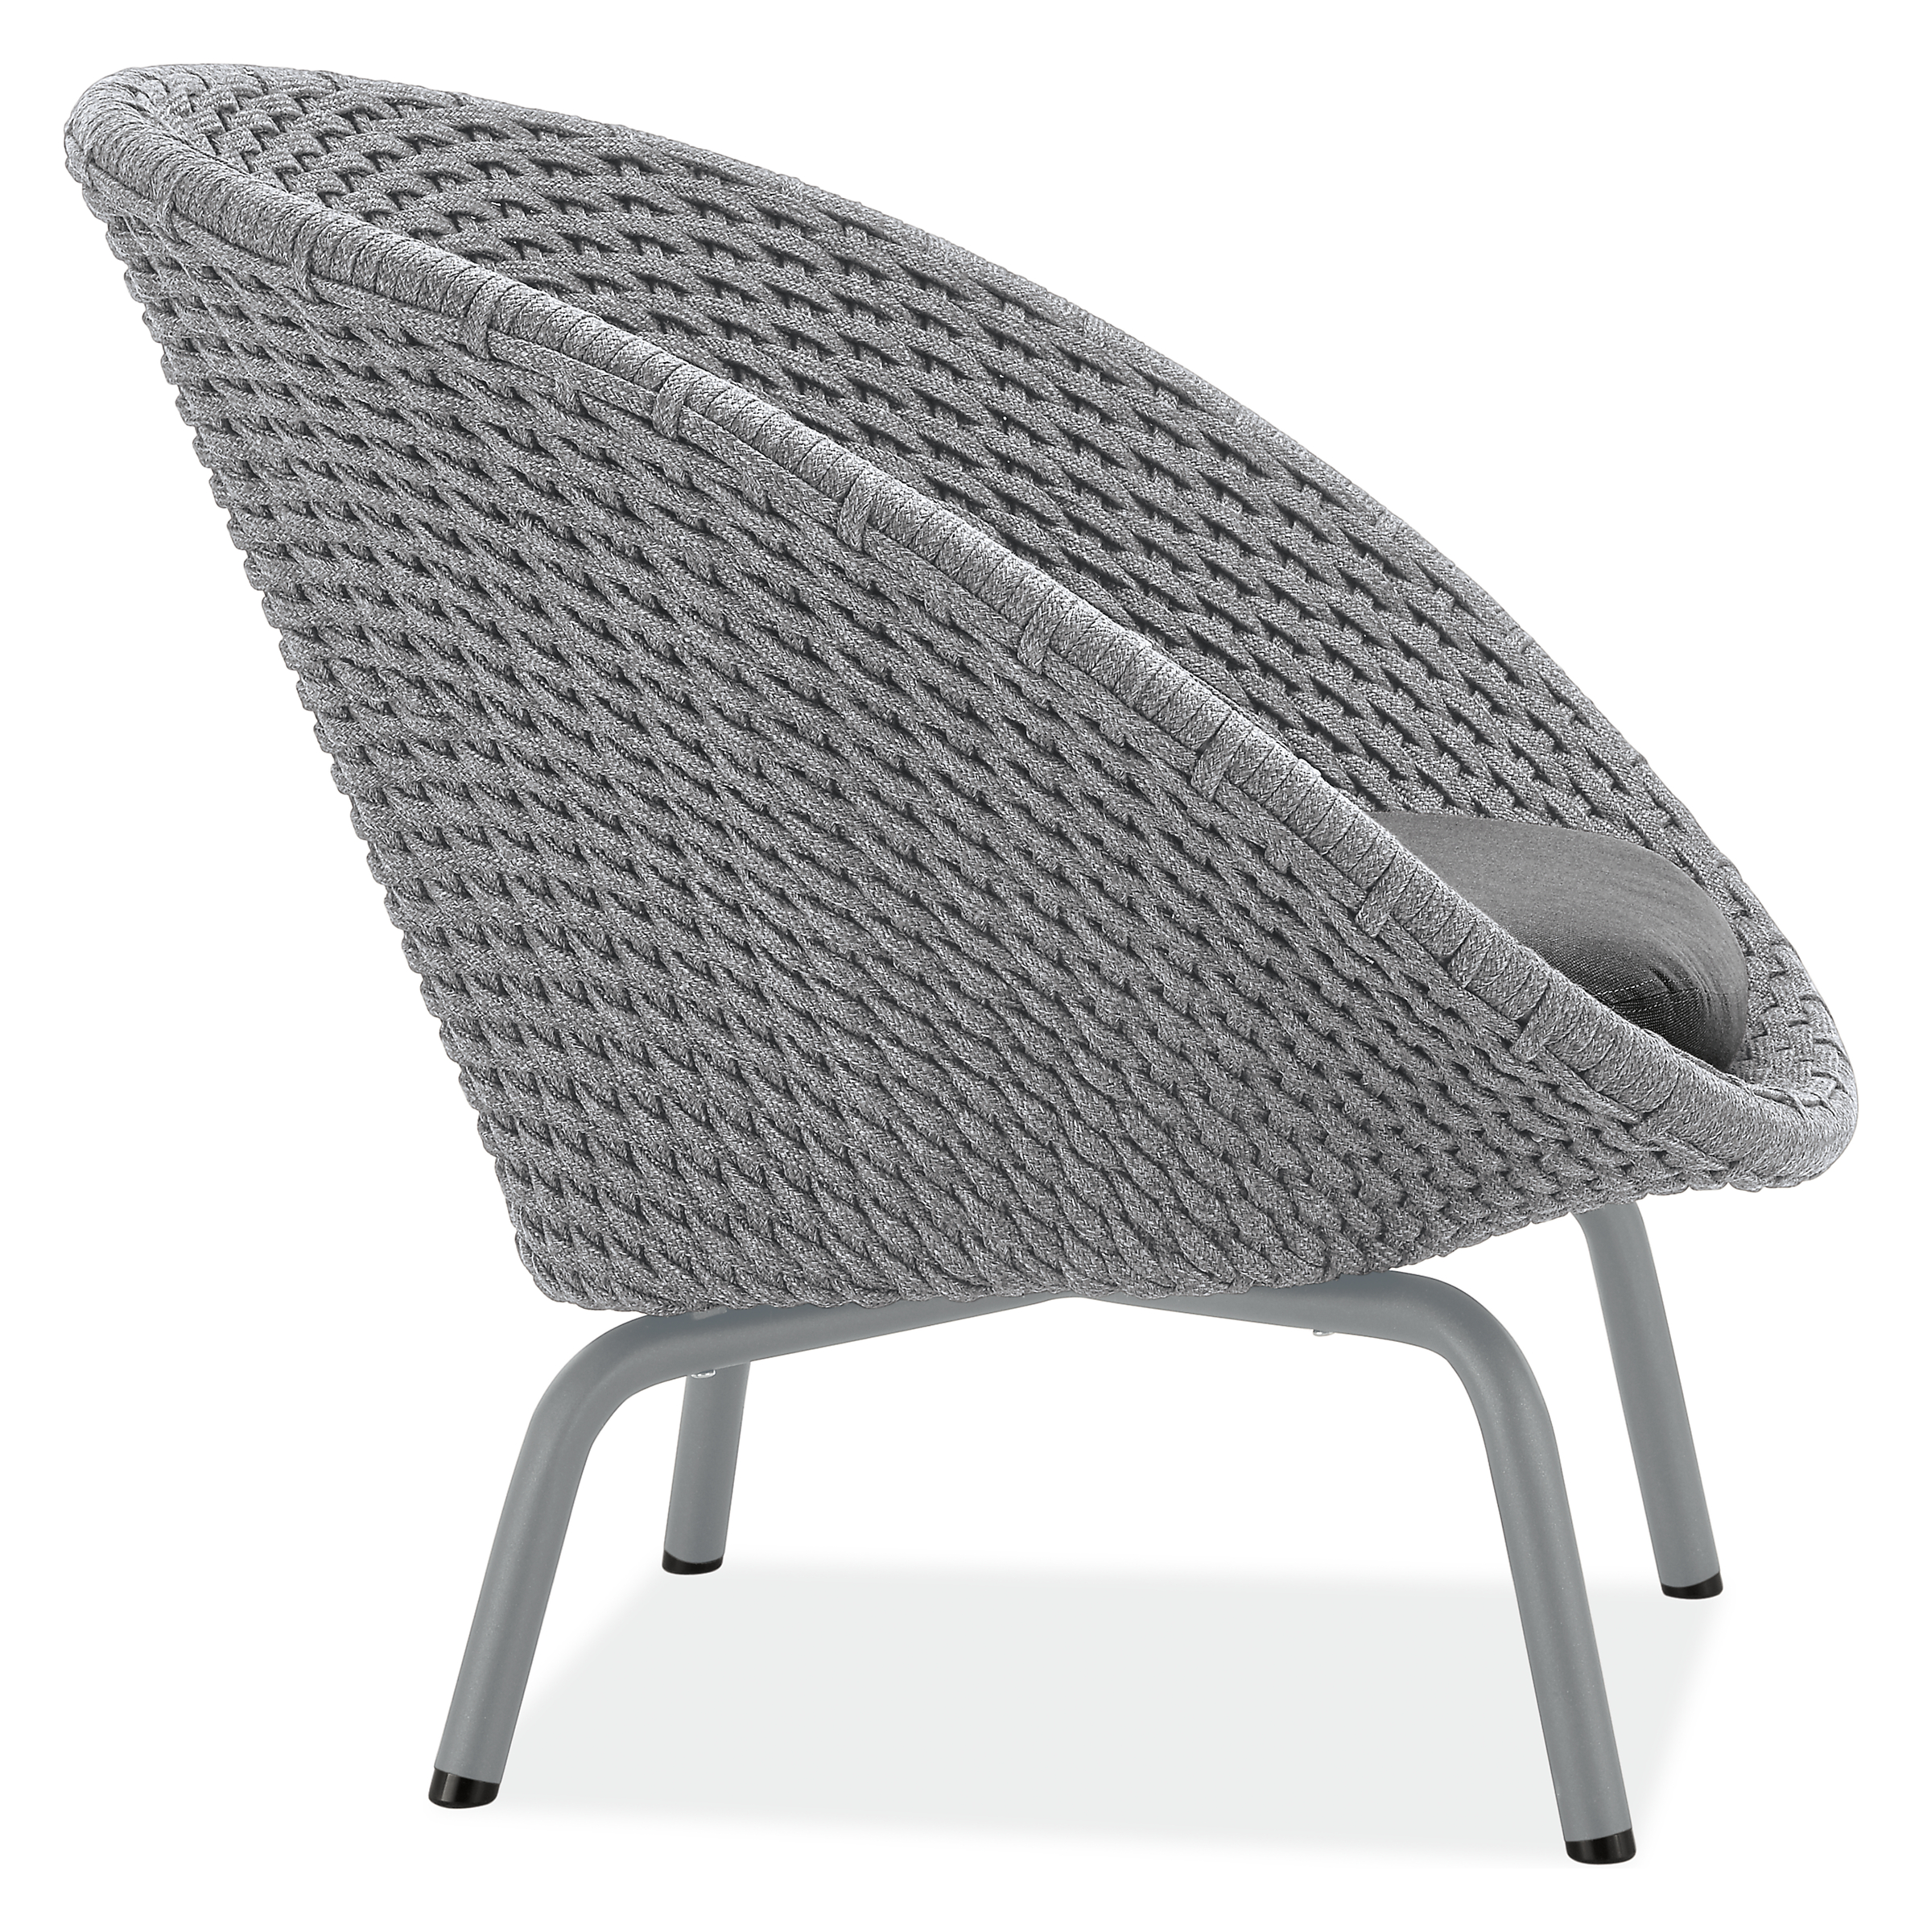 Side view of Flet Lounge Chair with Grey Cushions and Grey Base.